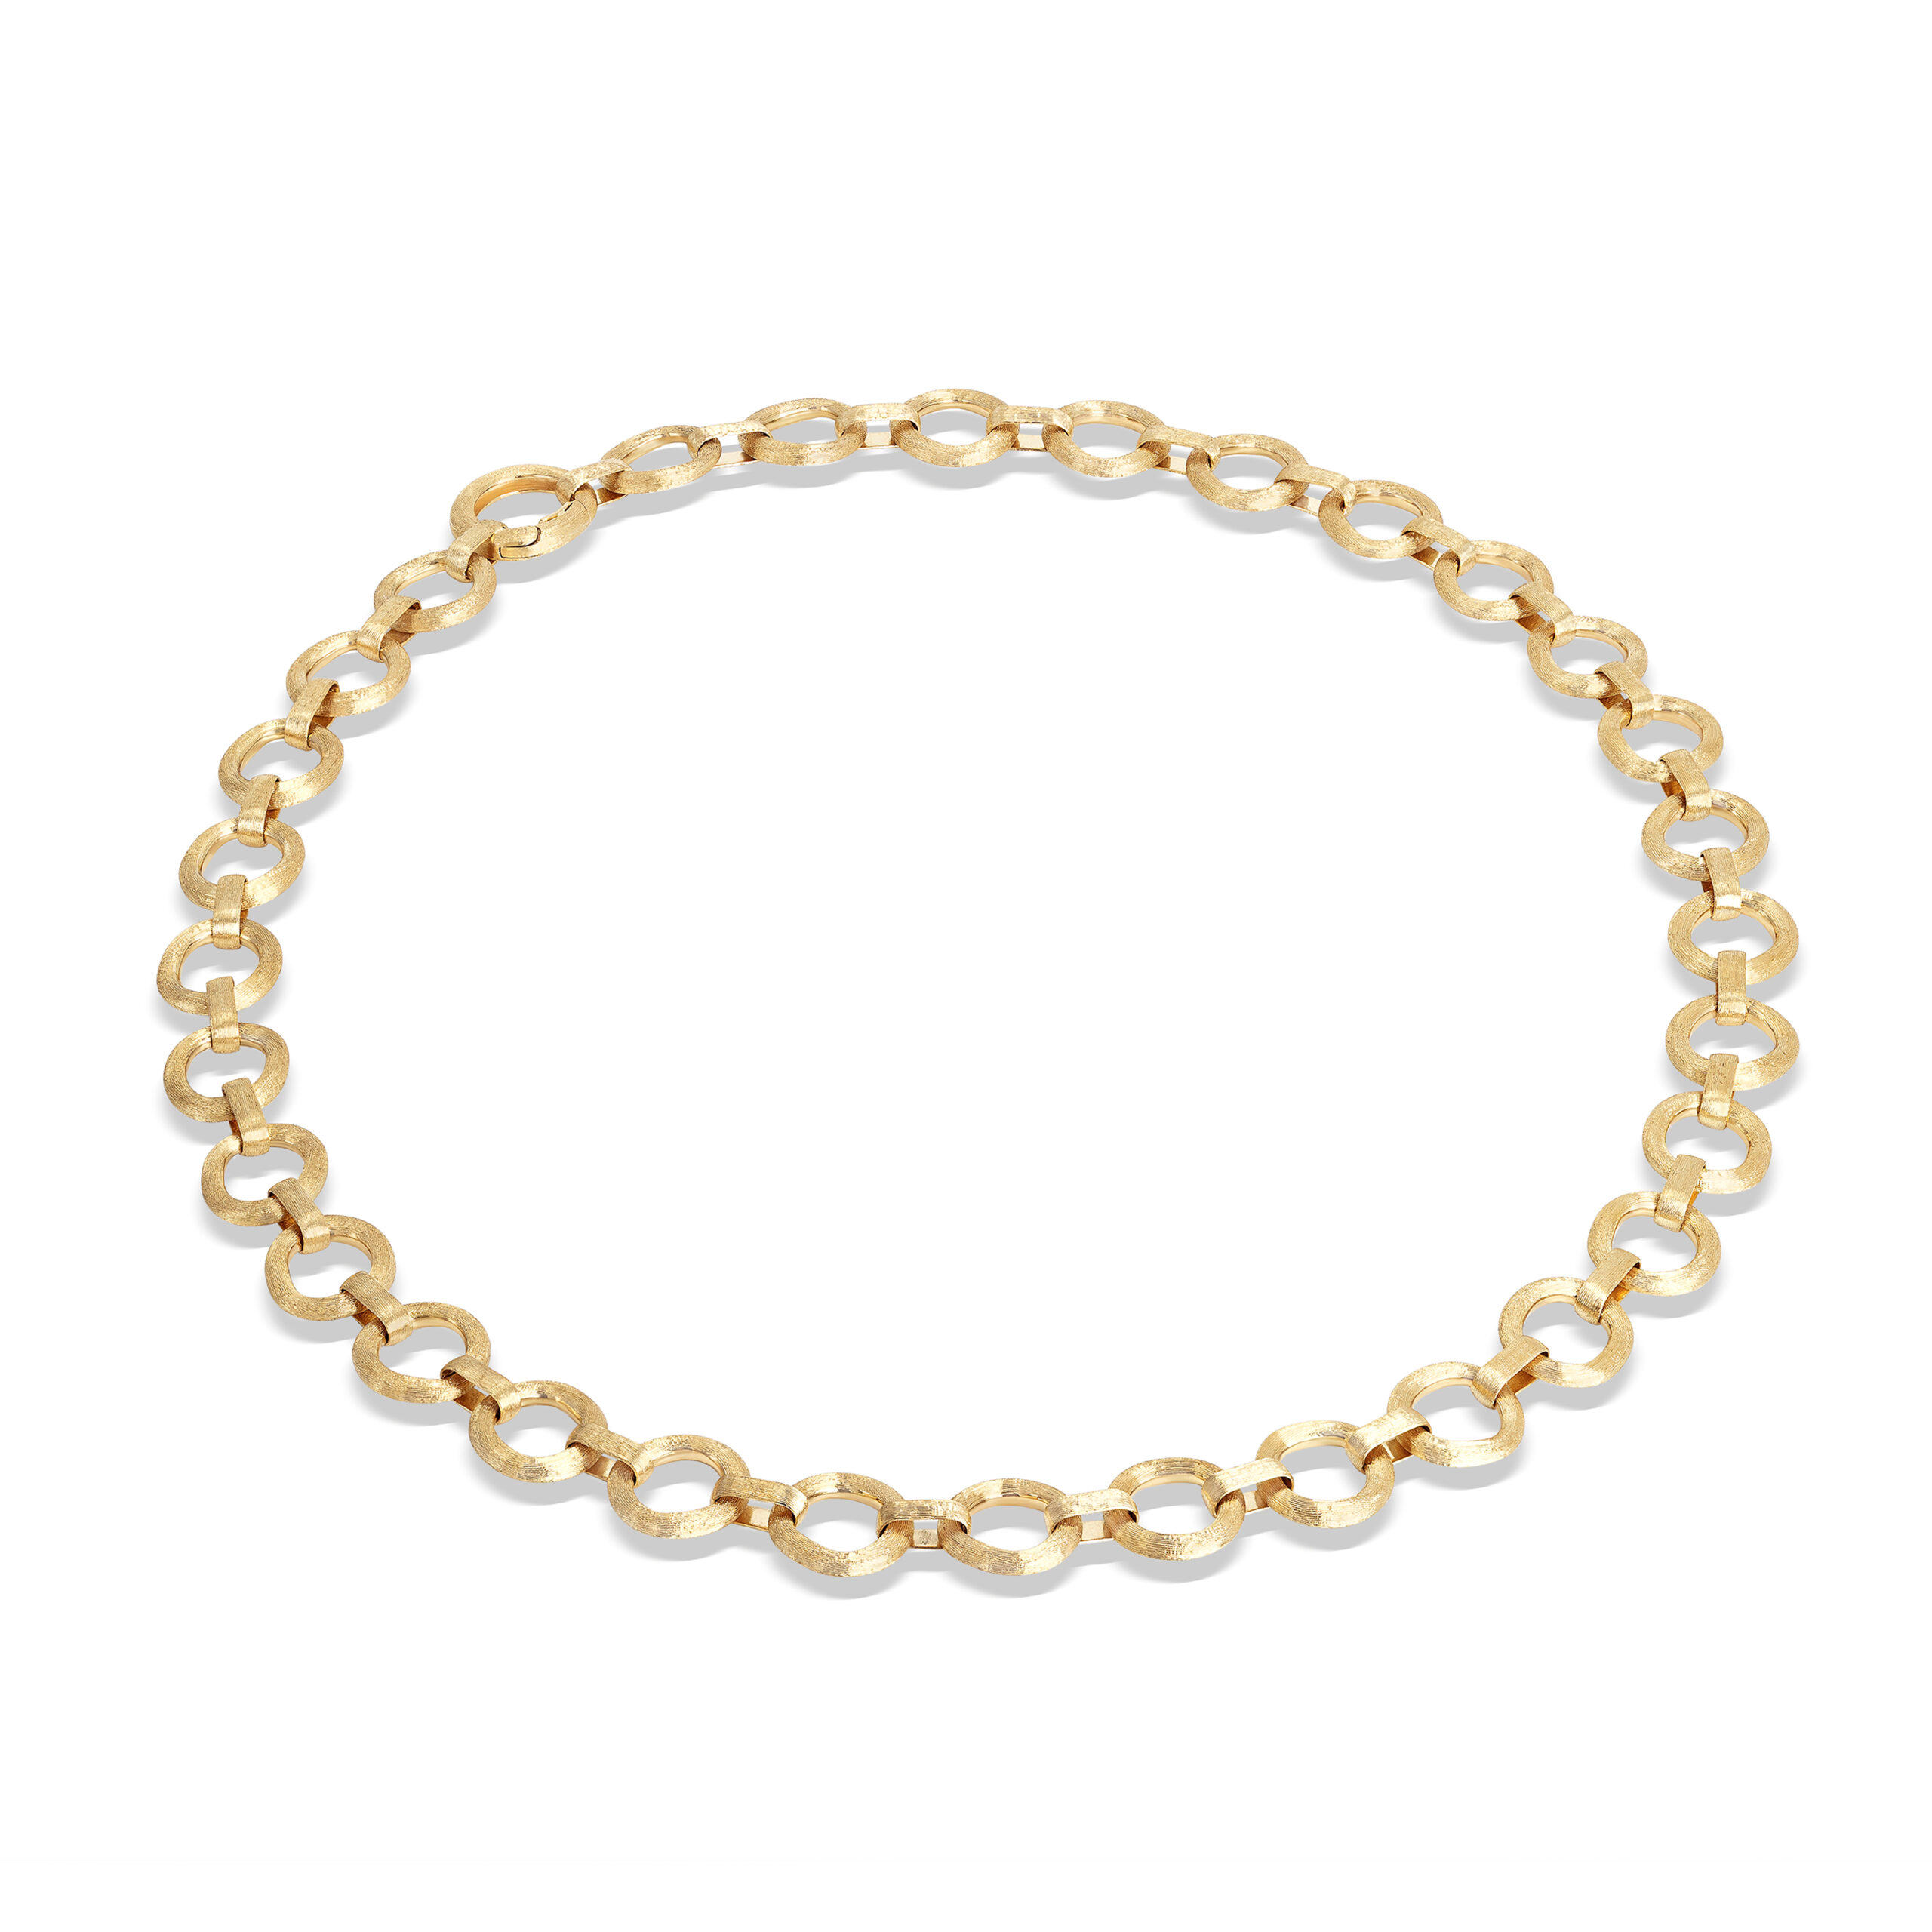 CB2609 Y 02Marco Bicego Jaipur Collection 18k Yellow Gold Flat Link Collar